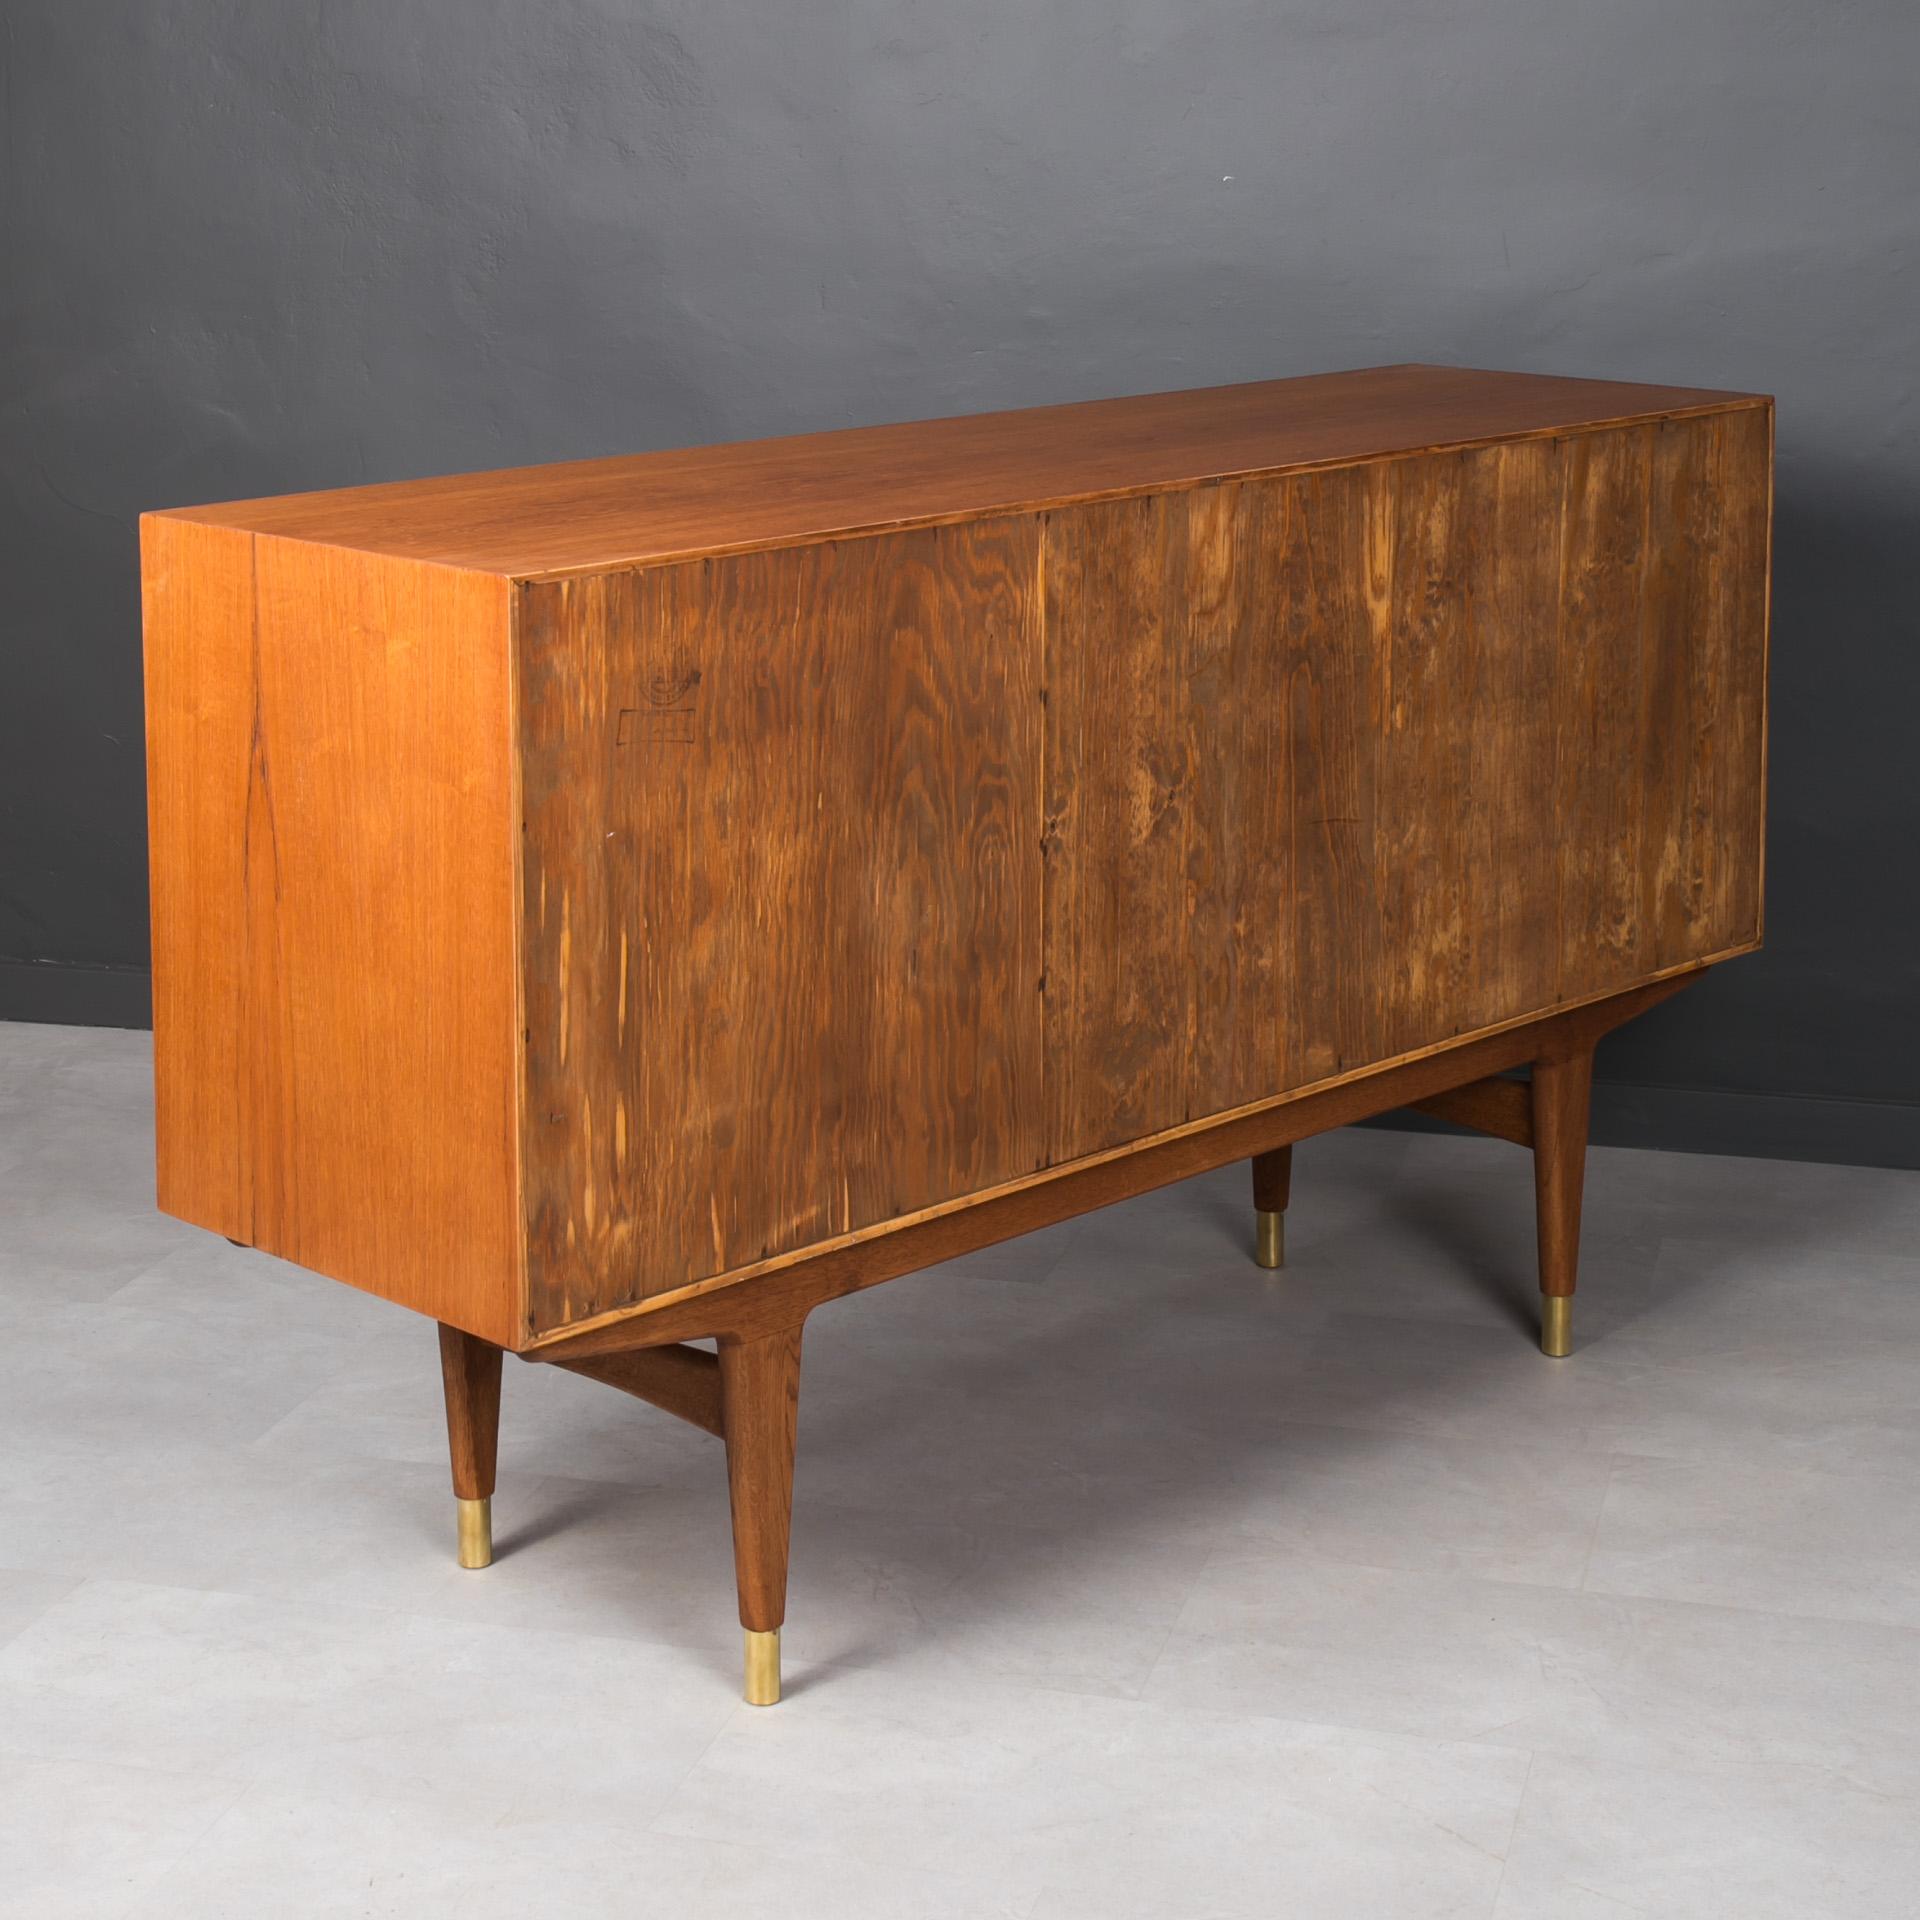 Midcentury Danish Sideboard, Teak Wood and Brass Details, 1950s For Sale 5